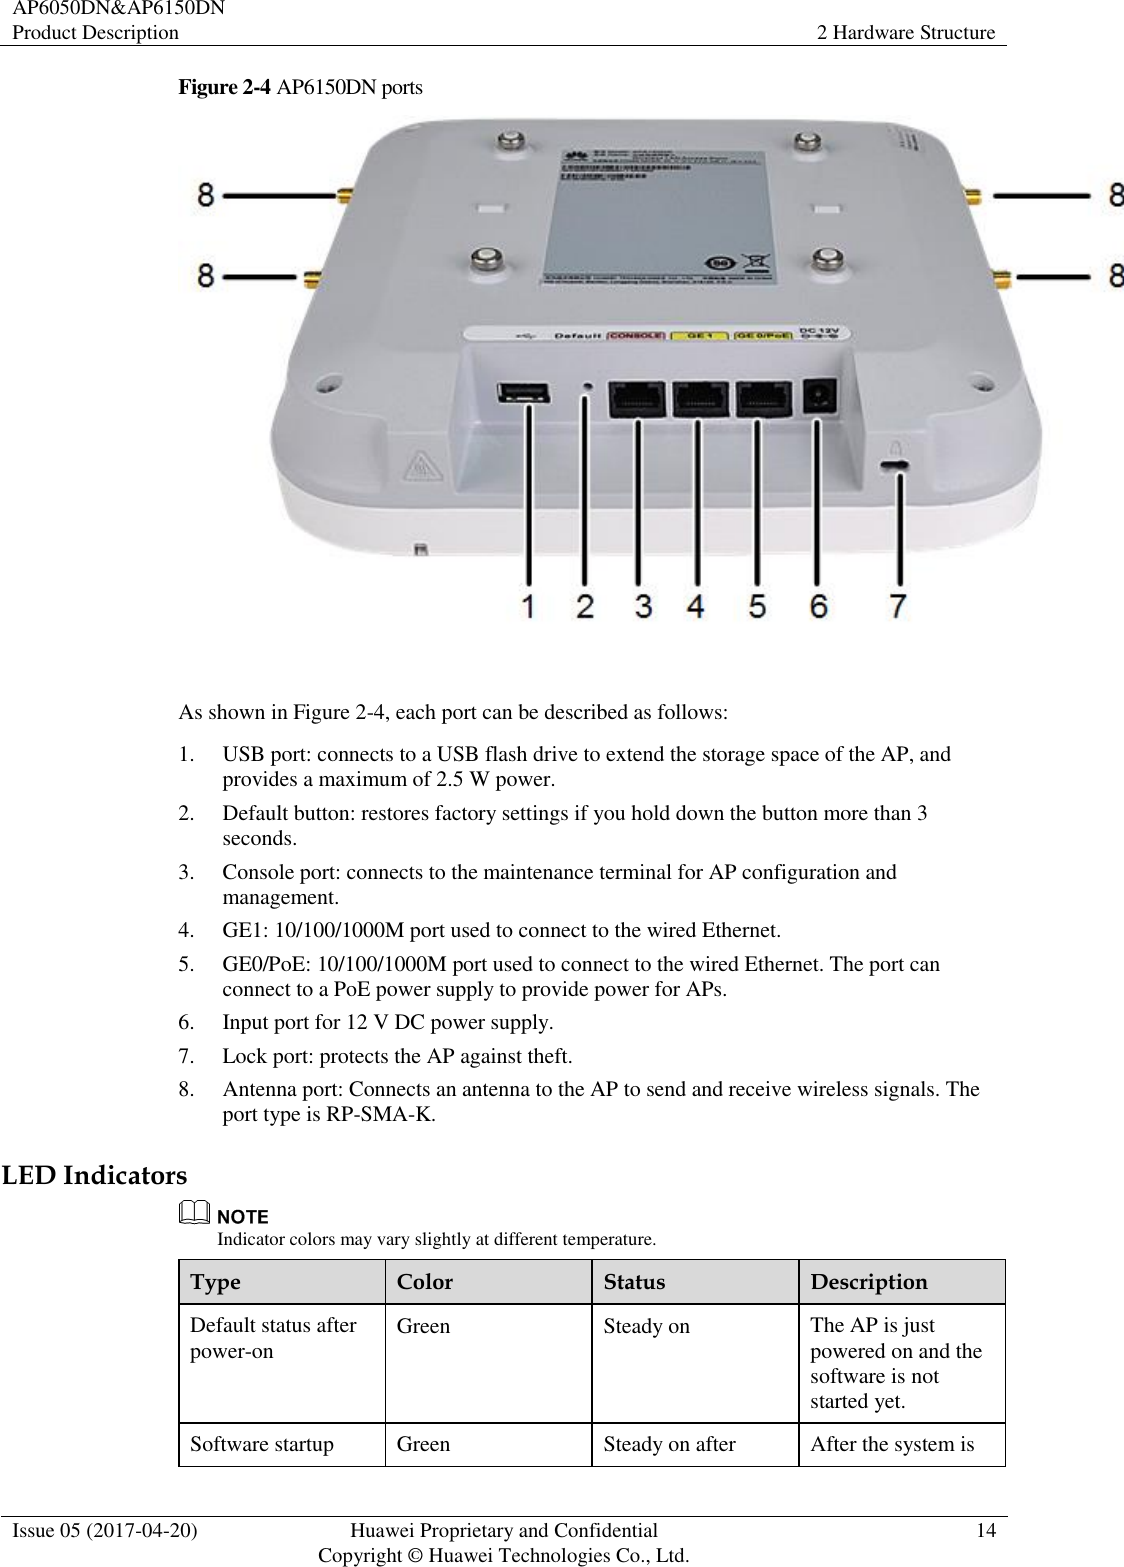 AP6050DN&amp;AP6150DN Product Description 2 Hardware Structure  Issue 05 (2017-04-20) Huawei Proprietary and Confidential                                     Copyright © Huawei Technologies Co., Ltd. 14  Figure 2-4 AP6150DN ports   As shown in Figure 2-4, each port can be described as follows: 1. USB port: connects to a USB flash drive to extend the storage space of the AP, and provides a maximum of 2.5 W power. 2. Default button: restores factory settings if you hold down the button more than 3 seconds. 3. Console port: connects to the maintenance terminal for AP configuration and management. 4. GE1: 10/100/1000M port used to connect to the wired Ethernet. 5. GE0/PoE: 10/100/1000M port used to connect to the wired Ethernet. The port can connect to a PoE power supply to provide power for APs. 6. Input port for 12 V DC power supply. 7. Lock port: protects the AP against theft. 8. Antenna port: Connects an antenna to the AP to send and receive wireless signals. The port type is RP-SMA-K. LED Indicators  Indicator colors may vary slightly at different temperature. Type Color Status Description Default status after power-on Green Steady on The AP is just powered on and the software is not started yet. Software startup Green Steady on after After the system is 